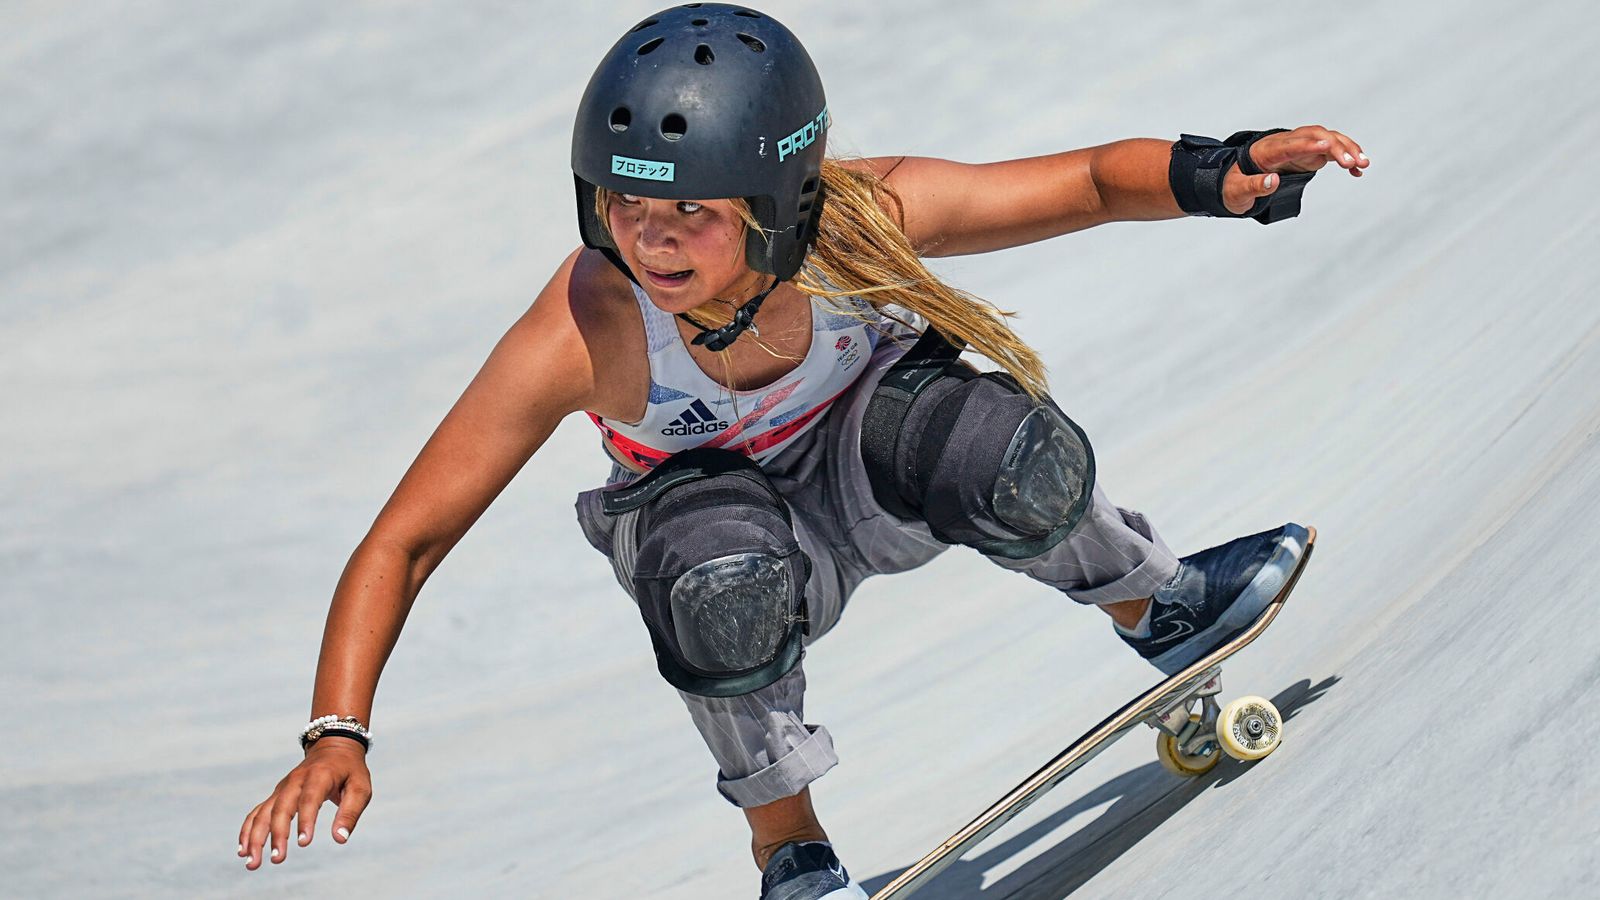 Sky Brown Tokyo 2020 Olympic bronze medallist wants to skate and surf